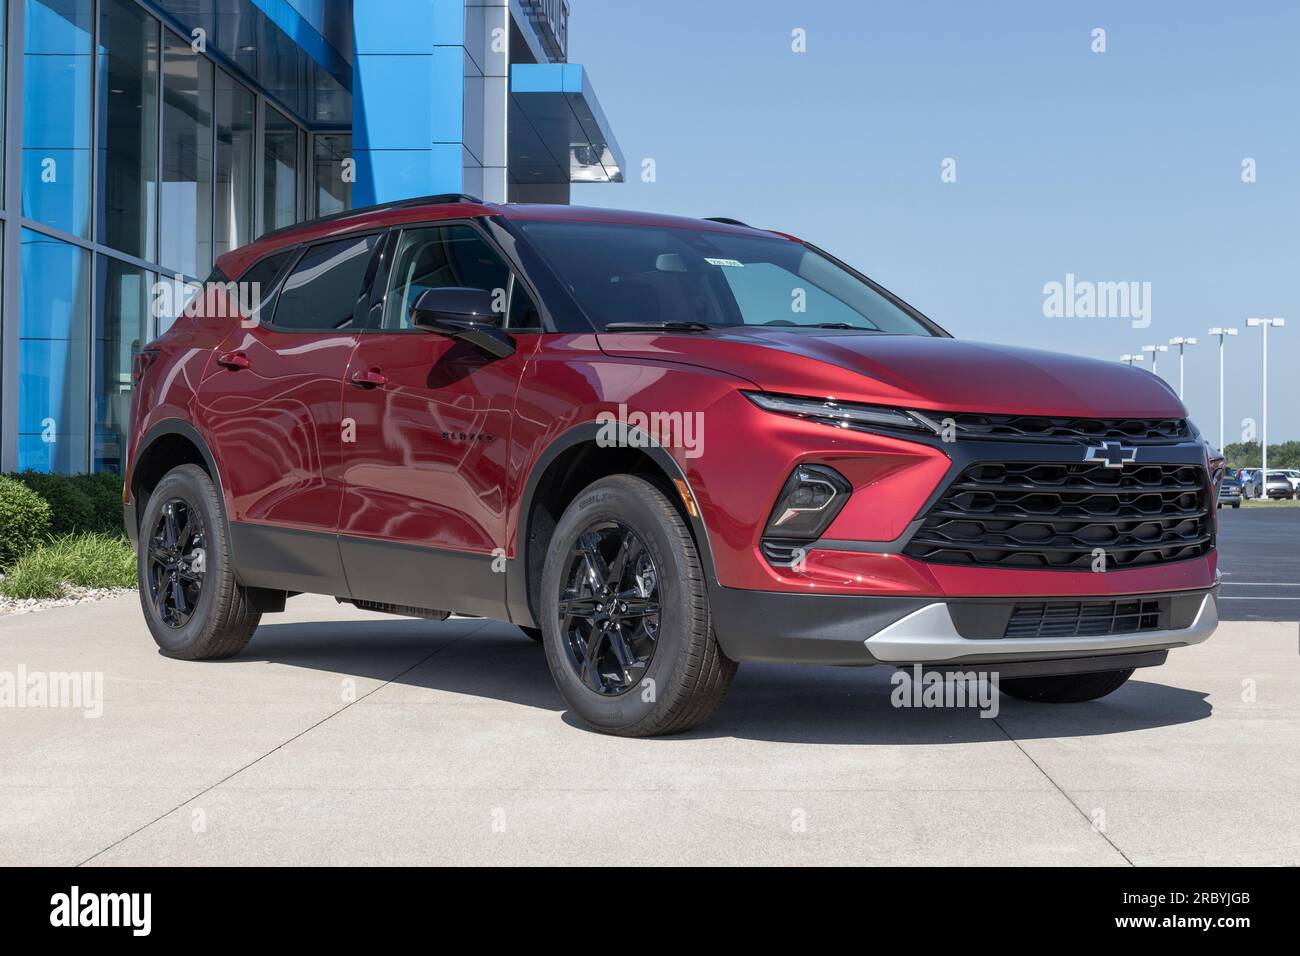 Muncie - July 10, 2023: Chevrolet Blazer display at a dealership. Chevy offers the Blazer in 2LT, 3LT and RS models. Stock Photo